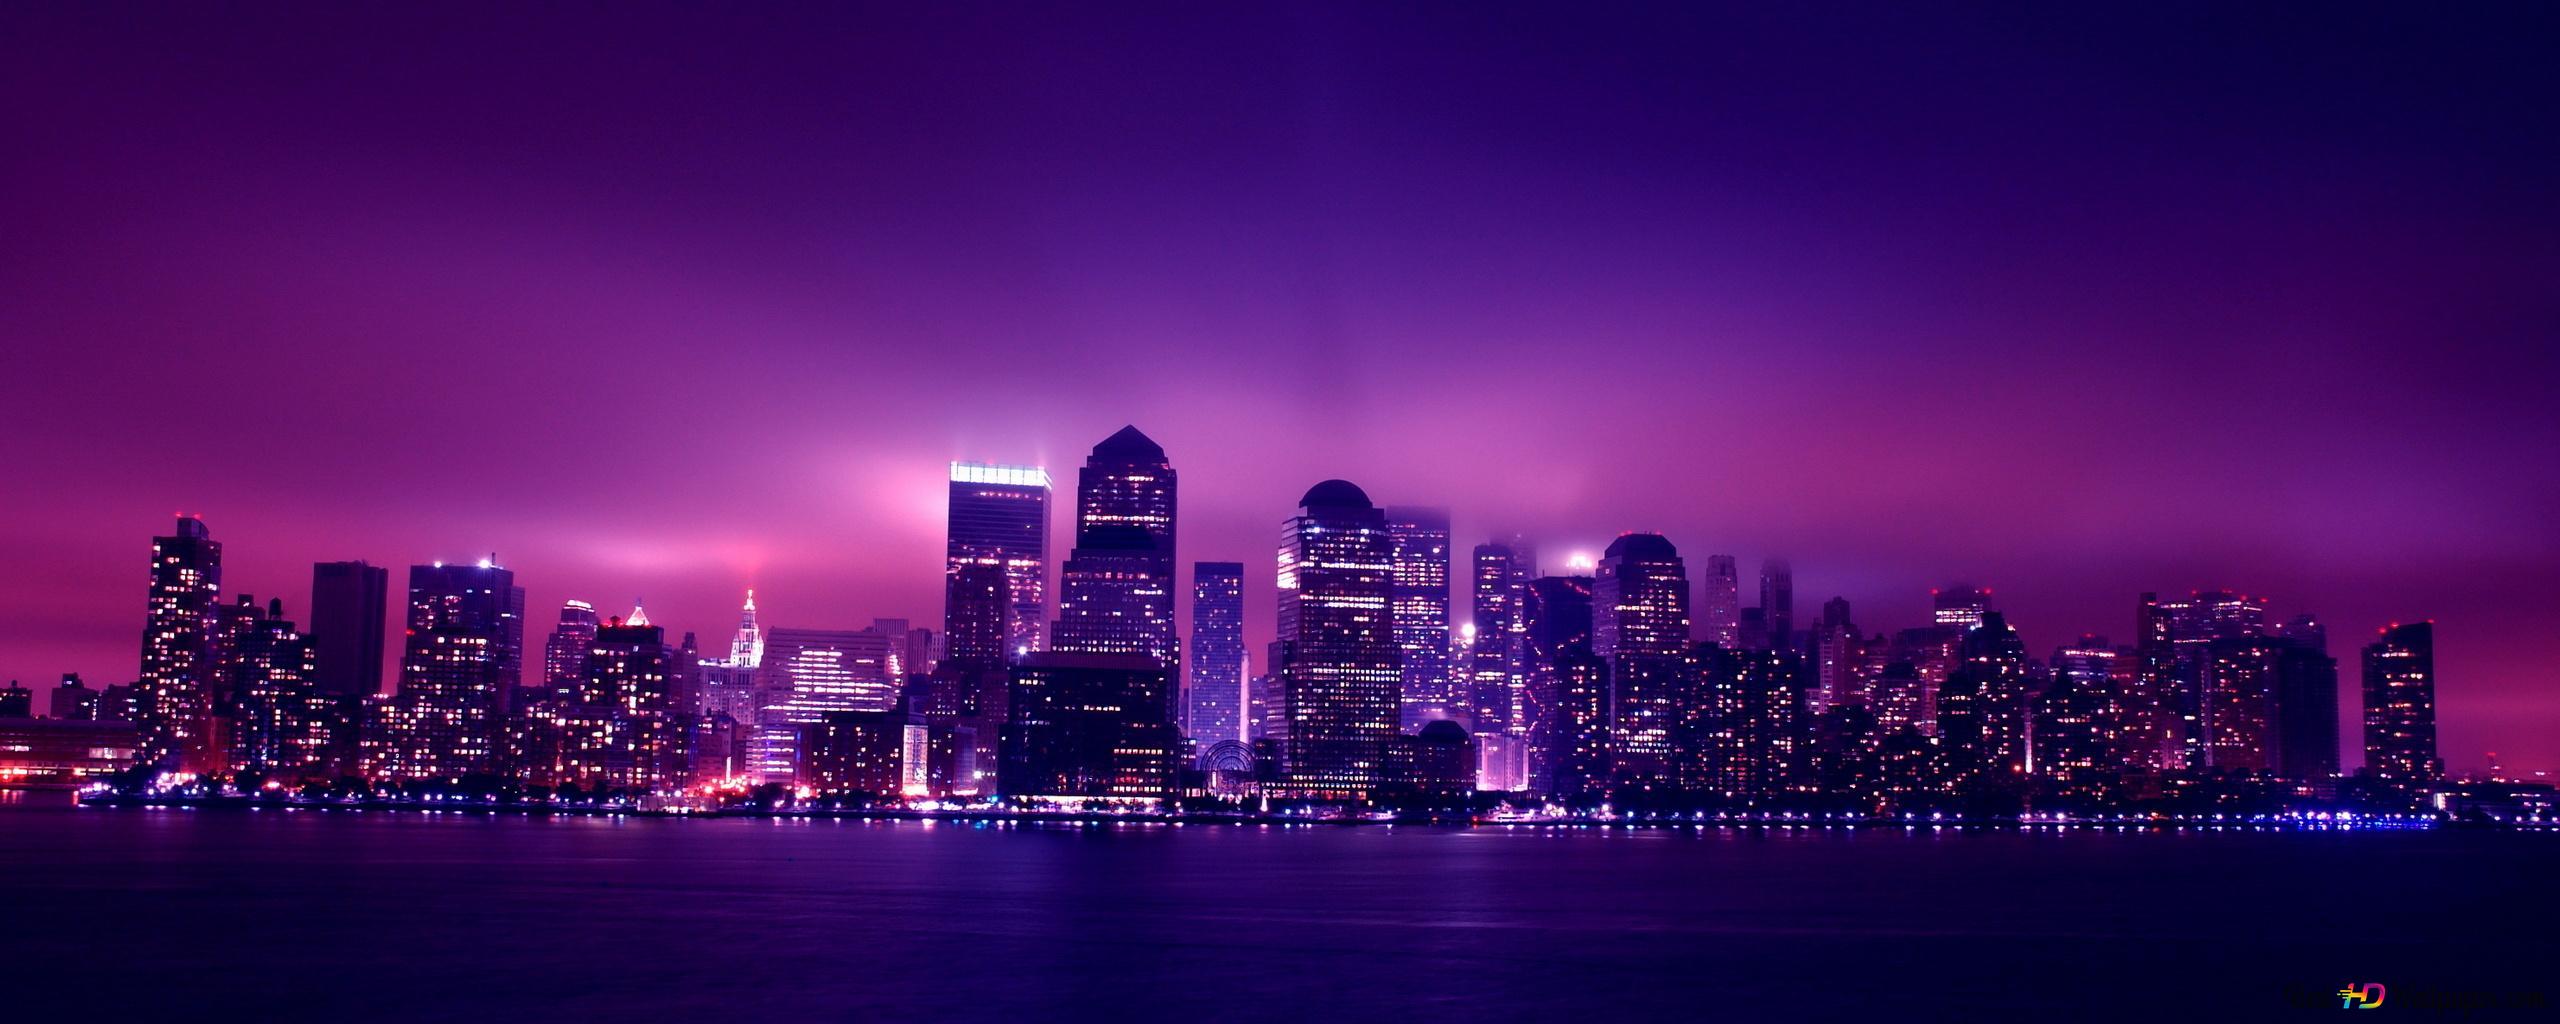 A purple city wallpaper for your computer desktop - New York, YouTube